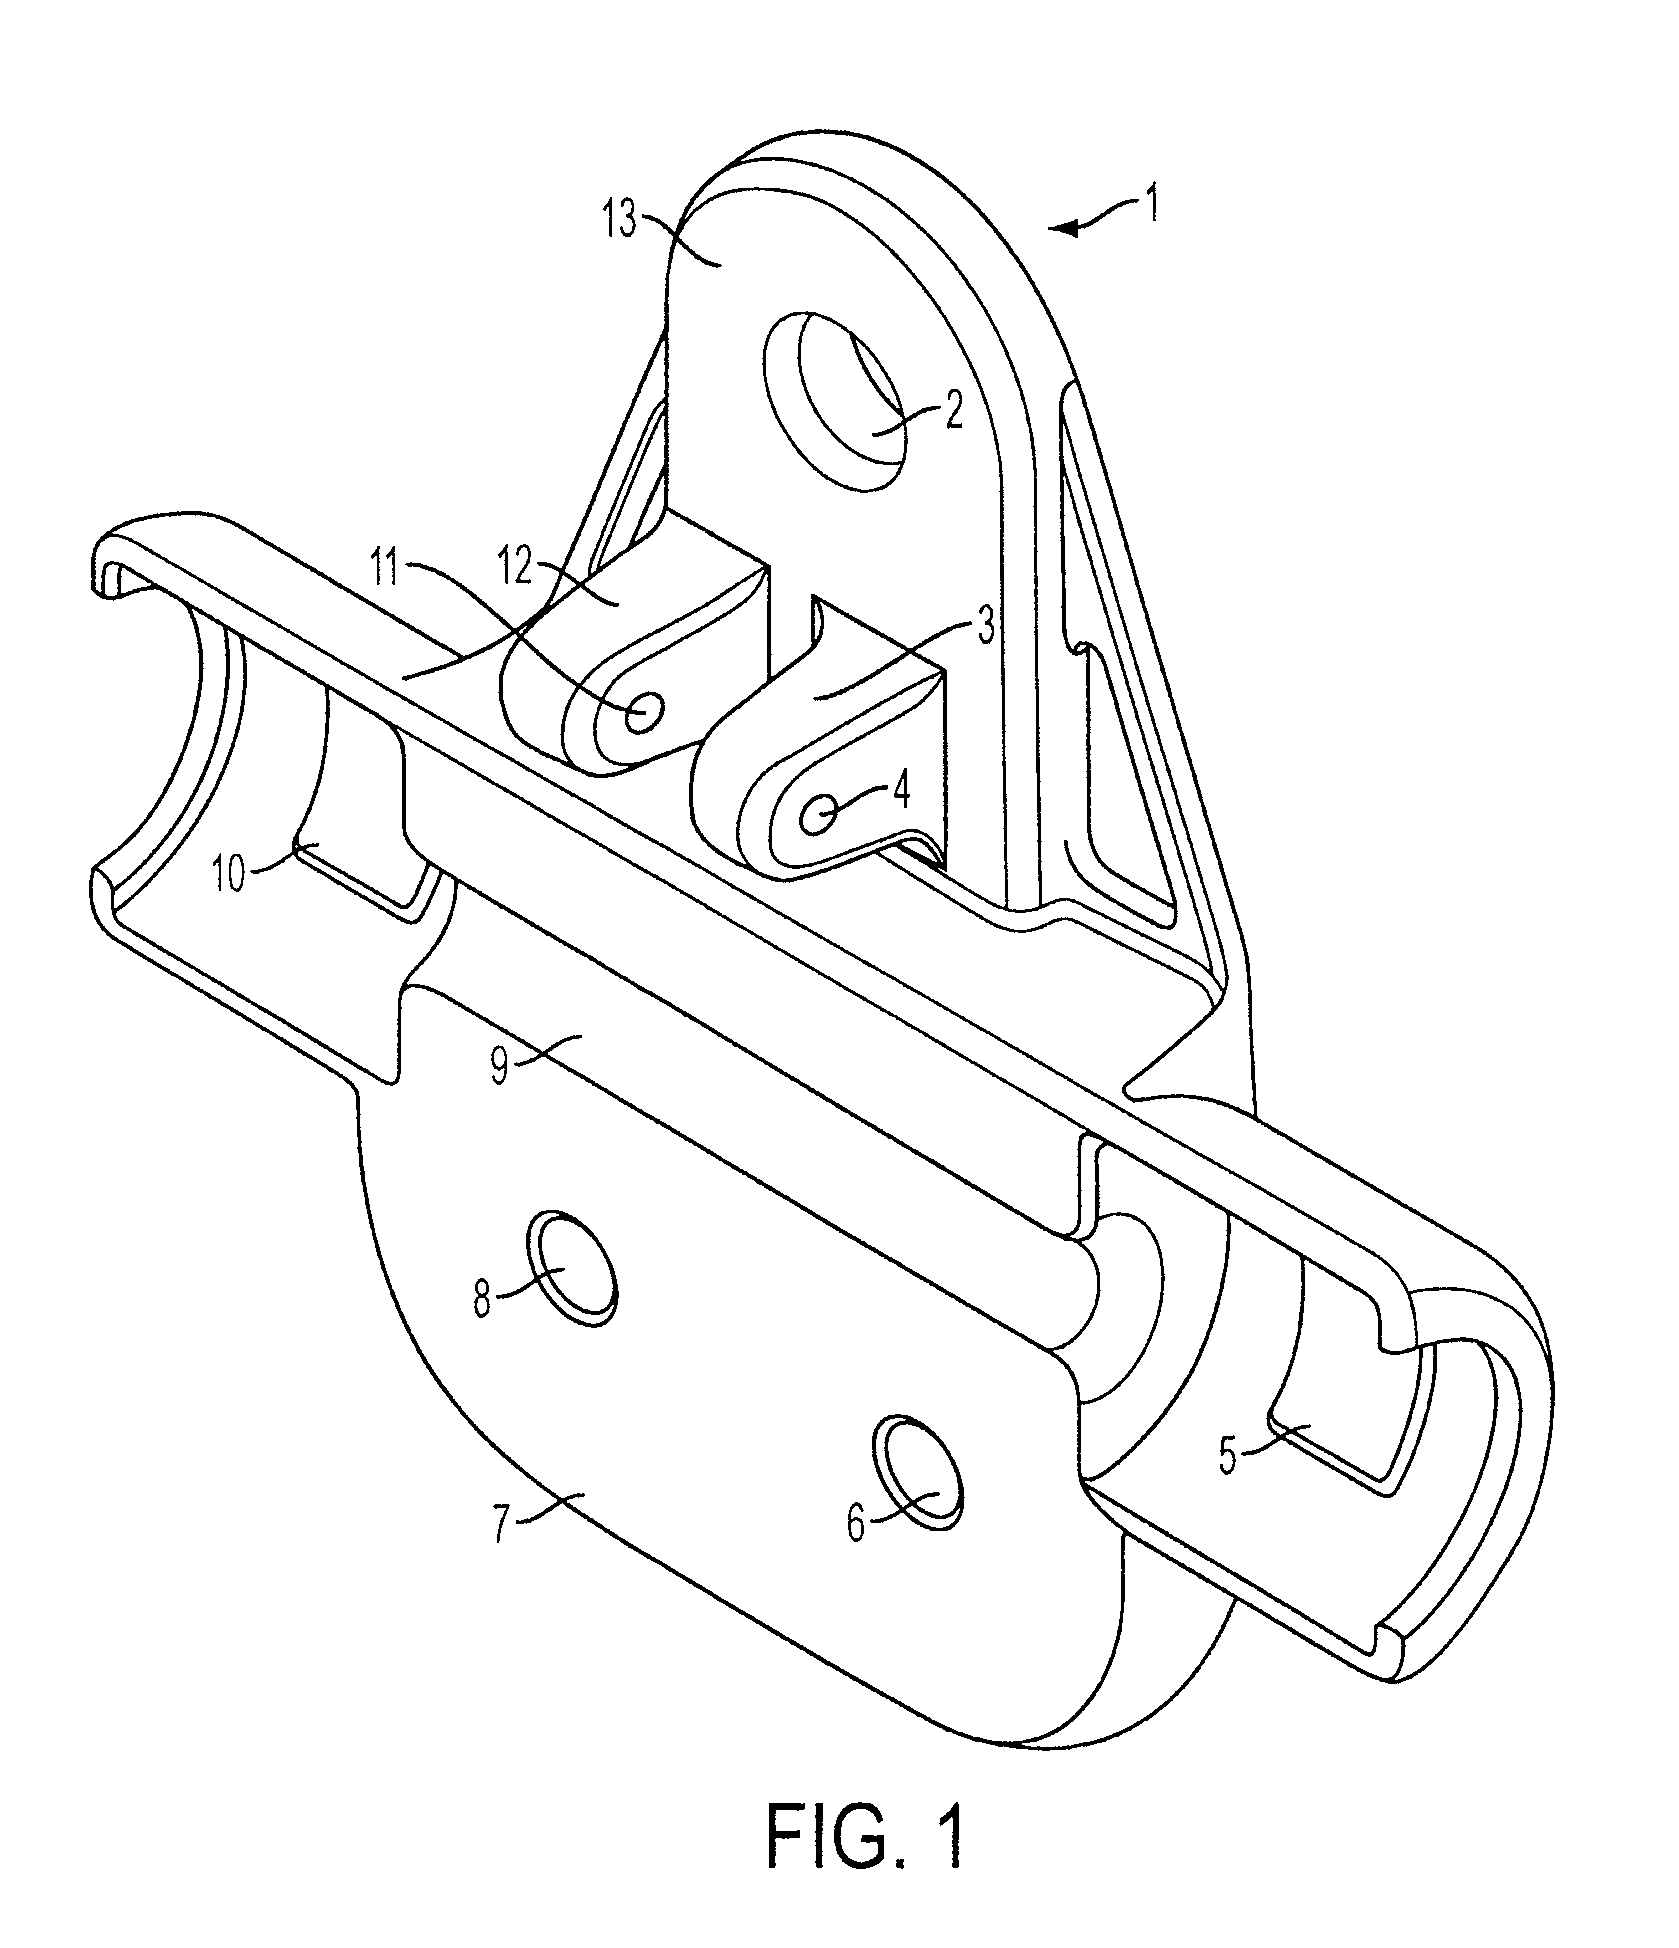 Hinged bushing suspension clamp and method for using said clamp